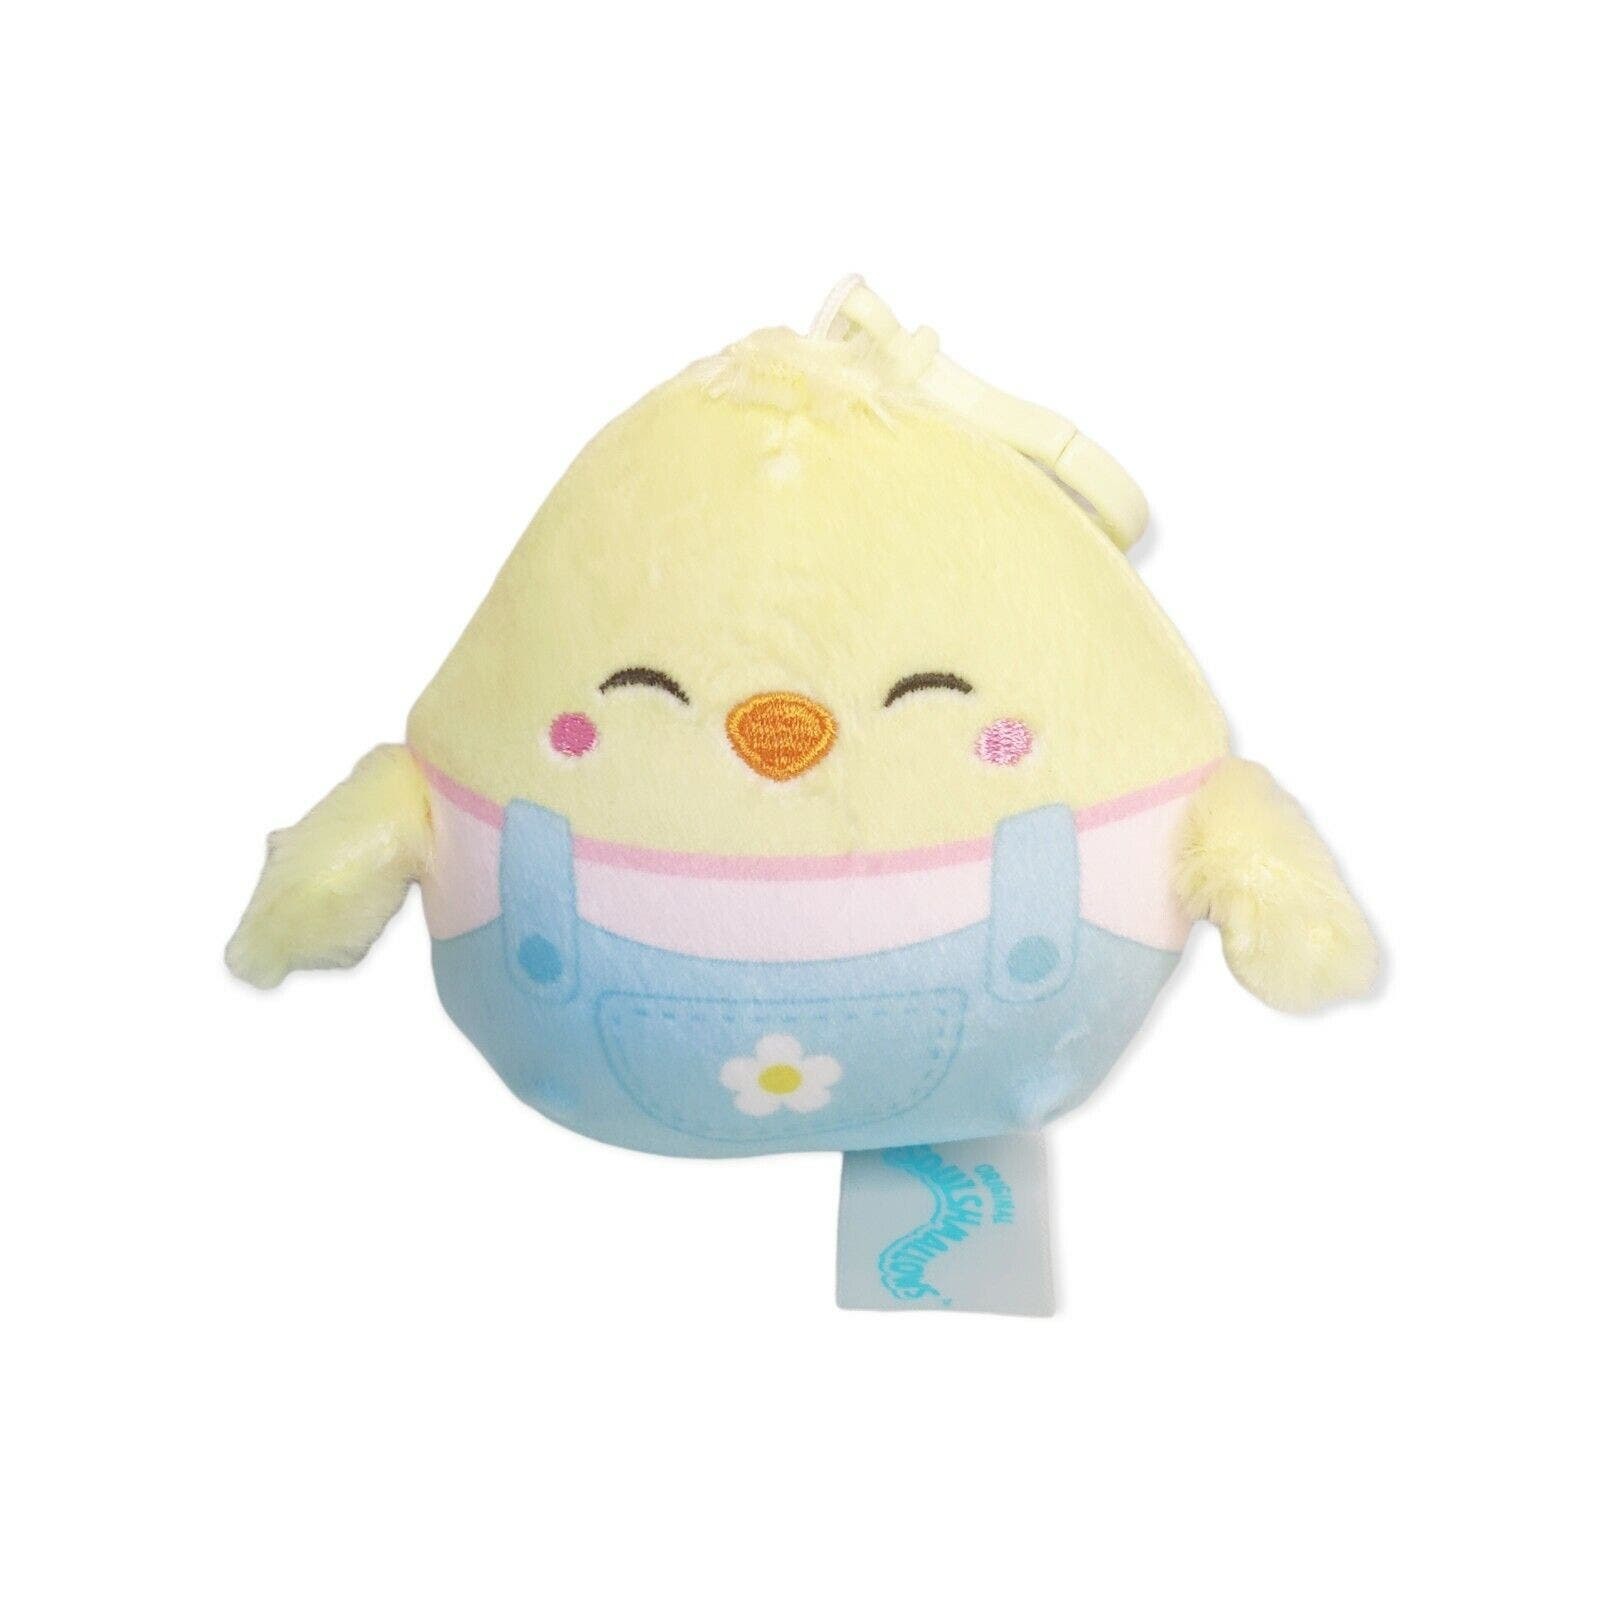 Primary image for Aimee the Chick 3.5" Squishmallows Clip Plush Stuffed Animal Easter Exclusive